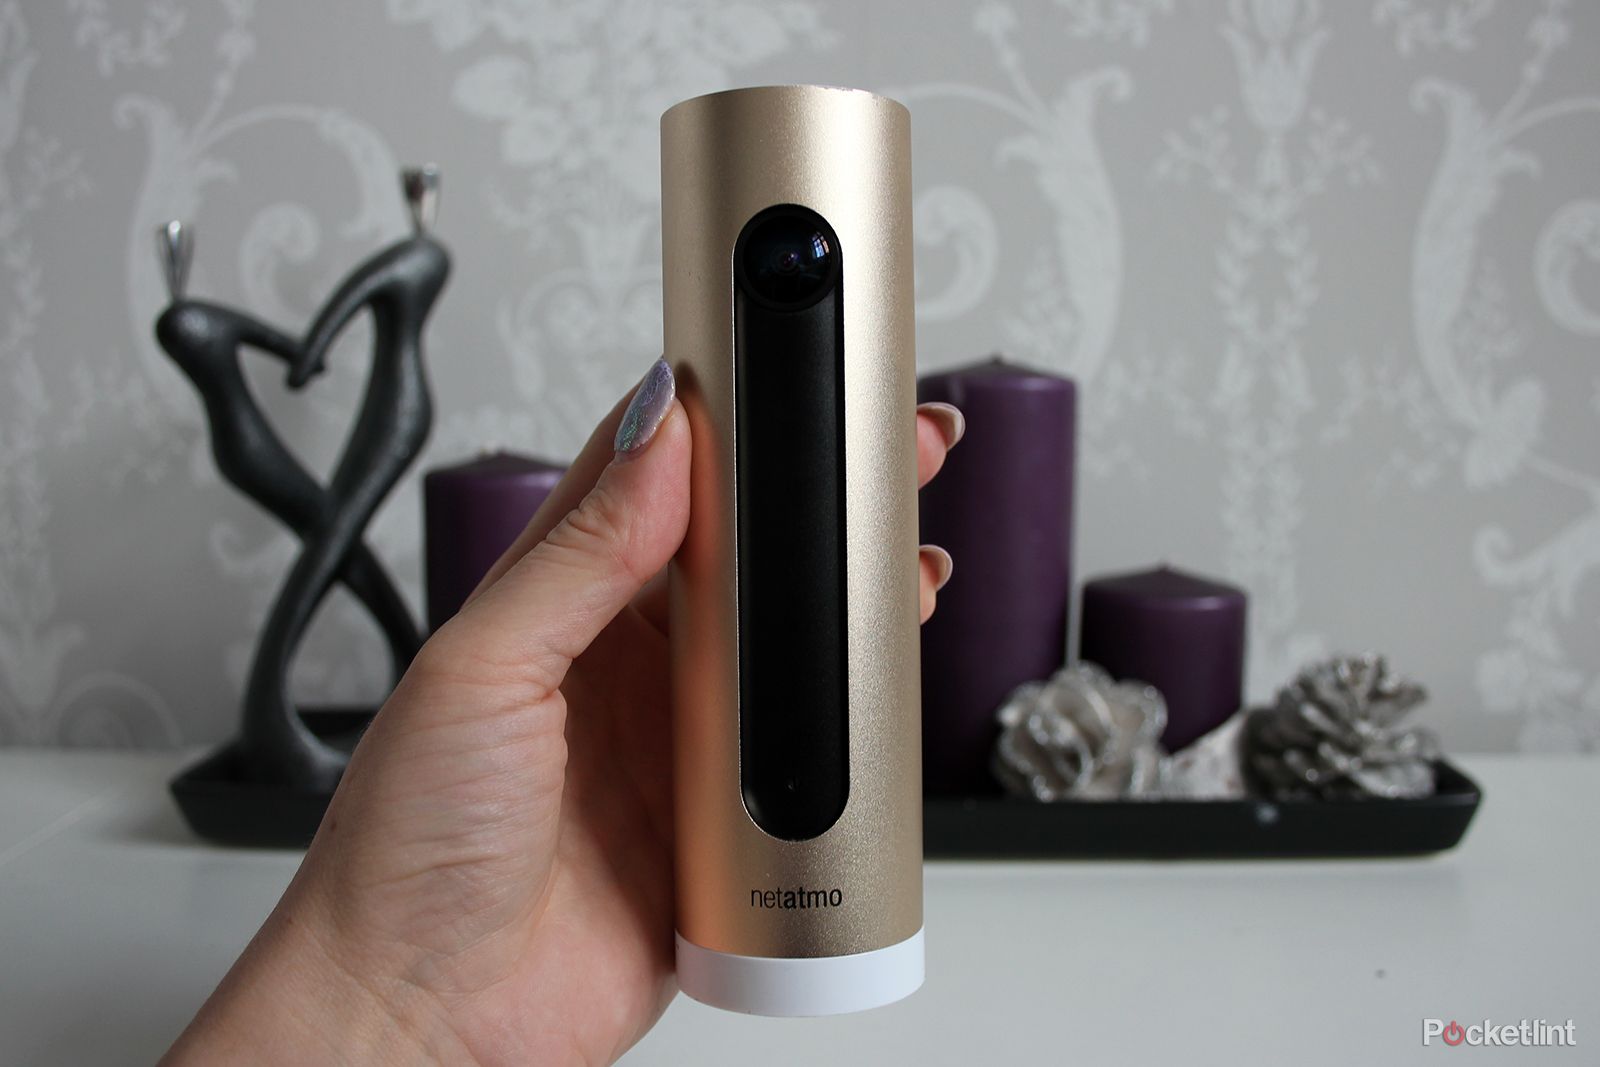 Netatmo smart home cameras are now compatible with Amazon Alexa image 1